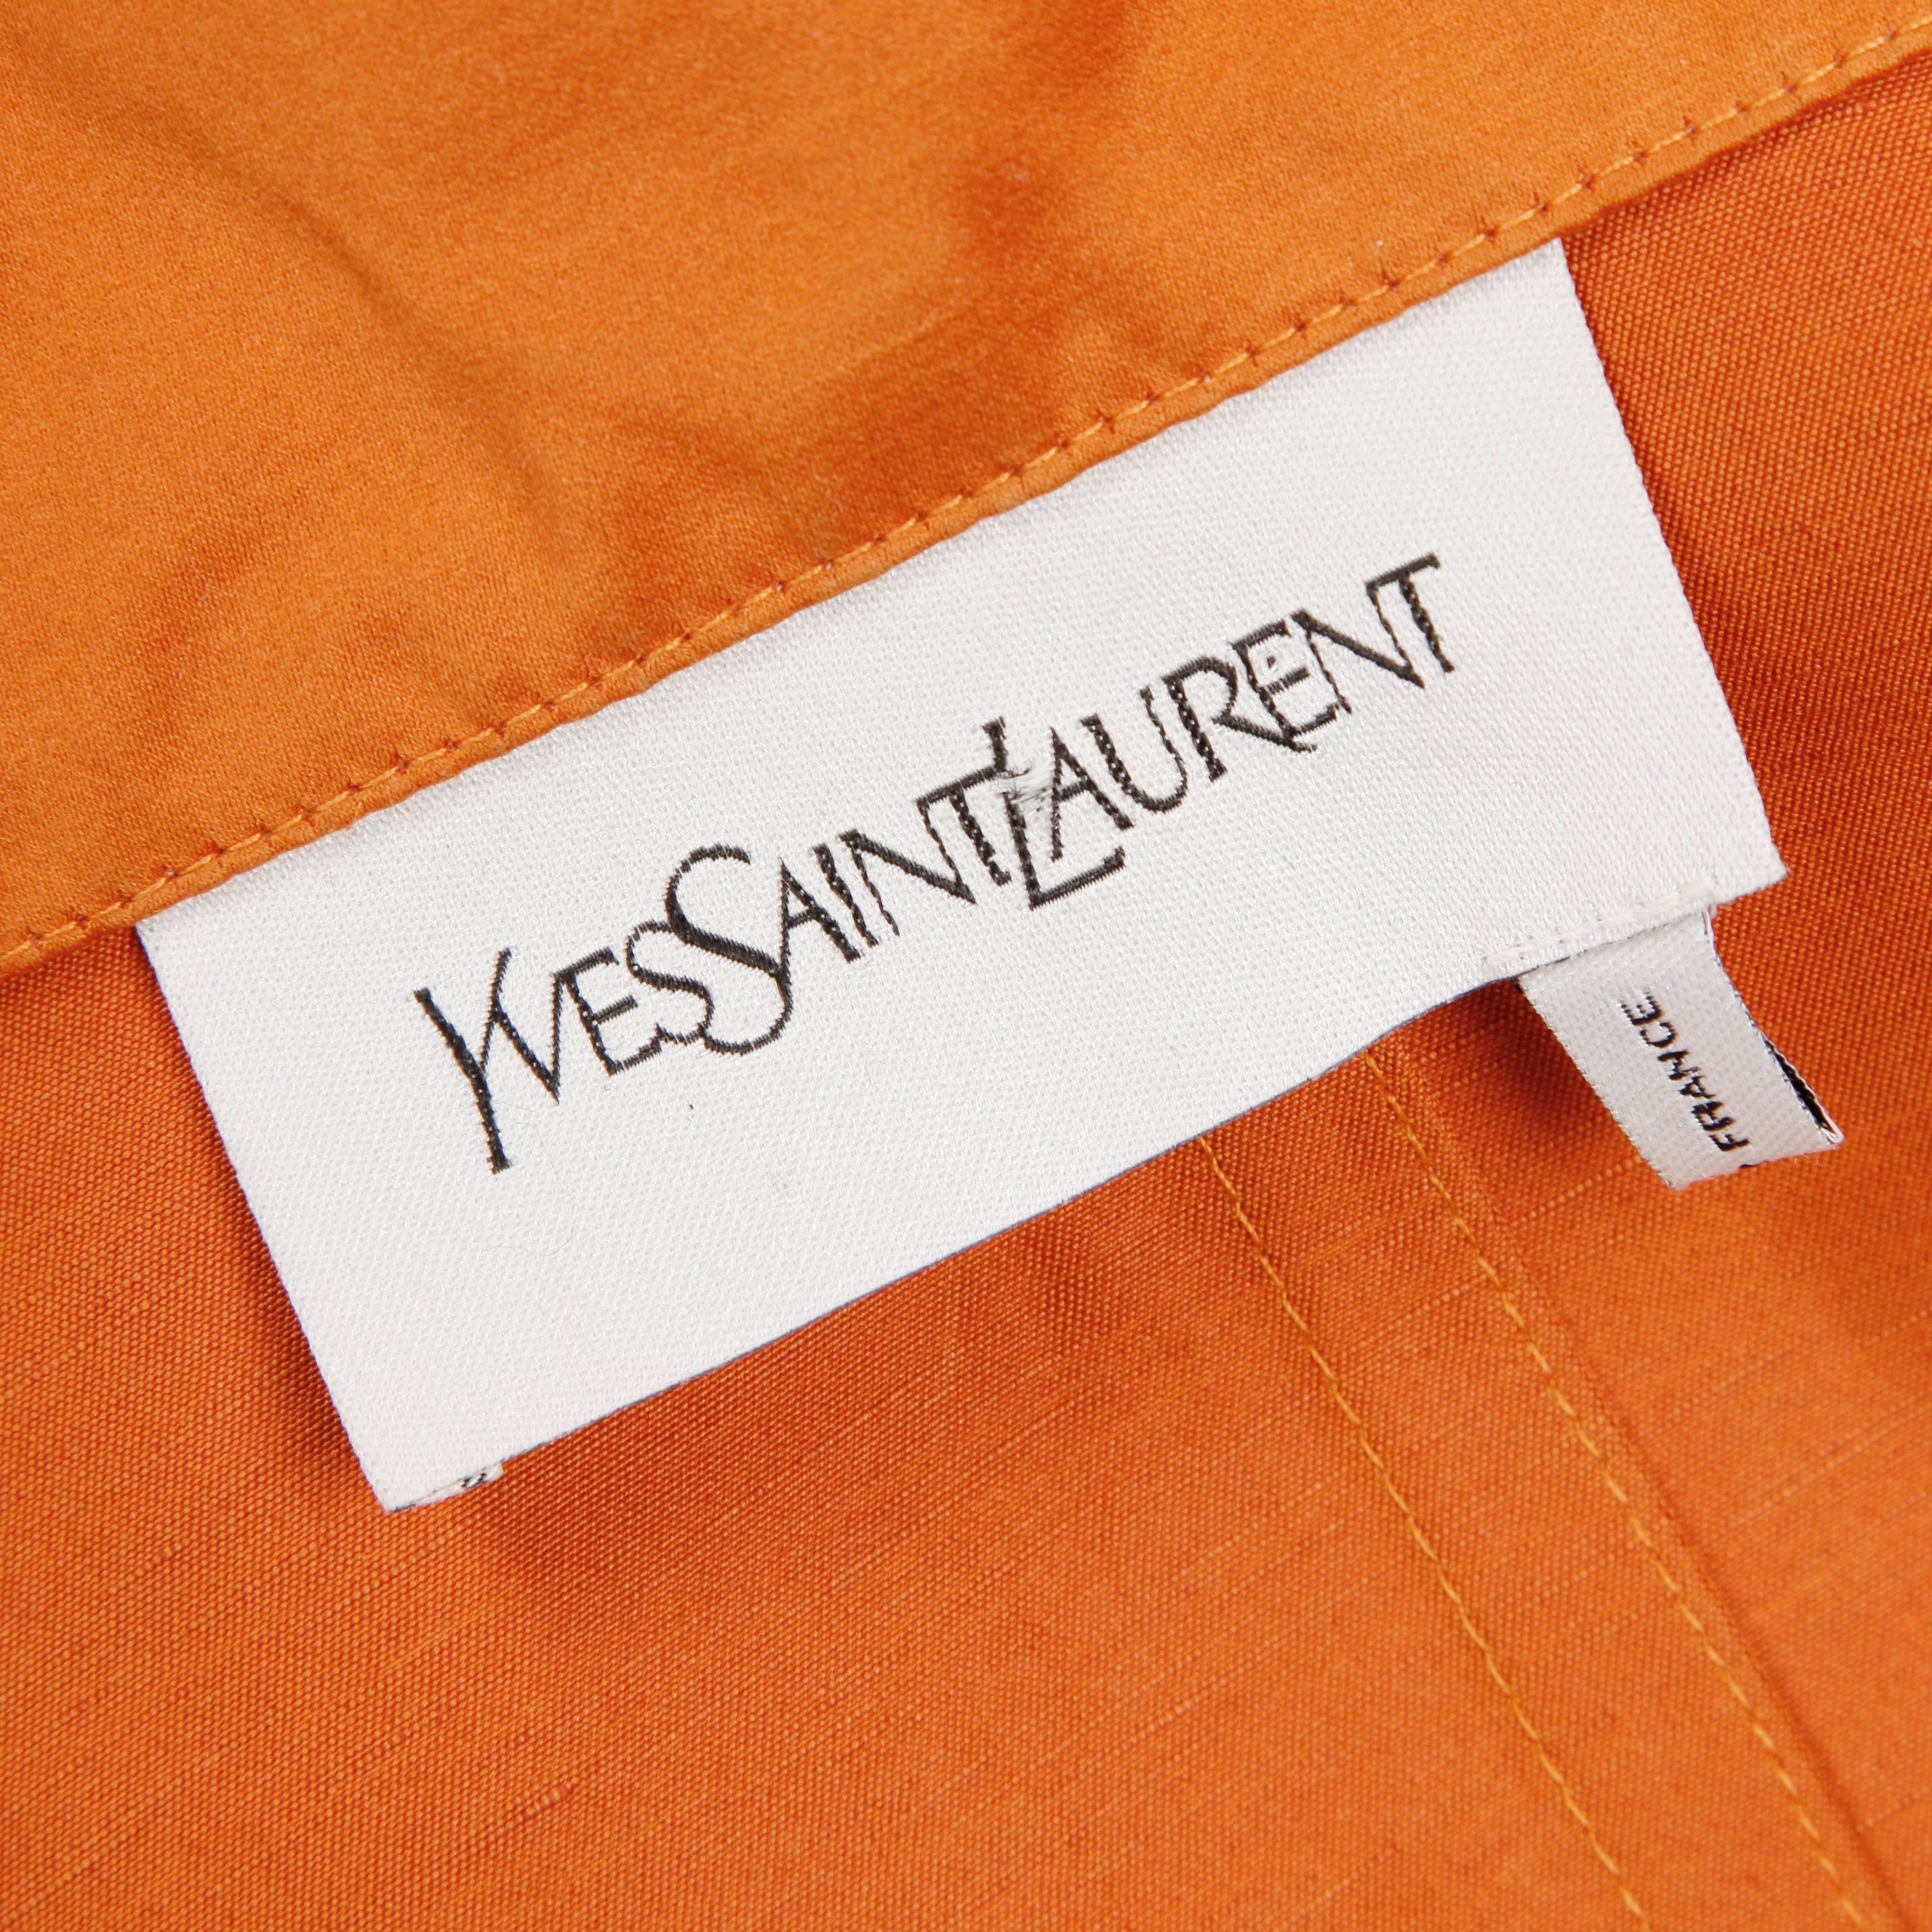 Yves Saint Laurent Rust/ Orange Fall Trench Coat Jacket In Excellent Condition For Sale In Sparks, NV